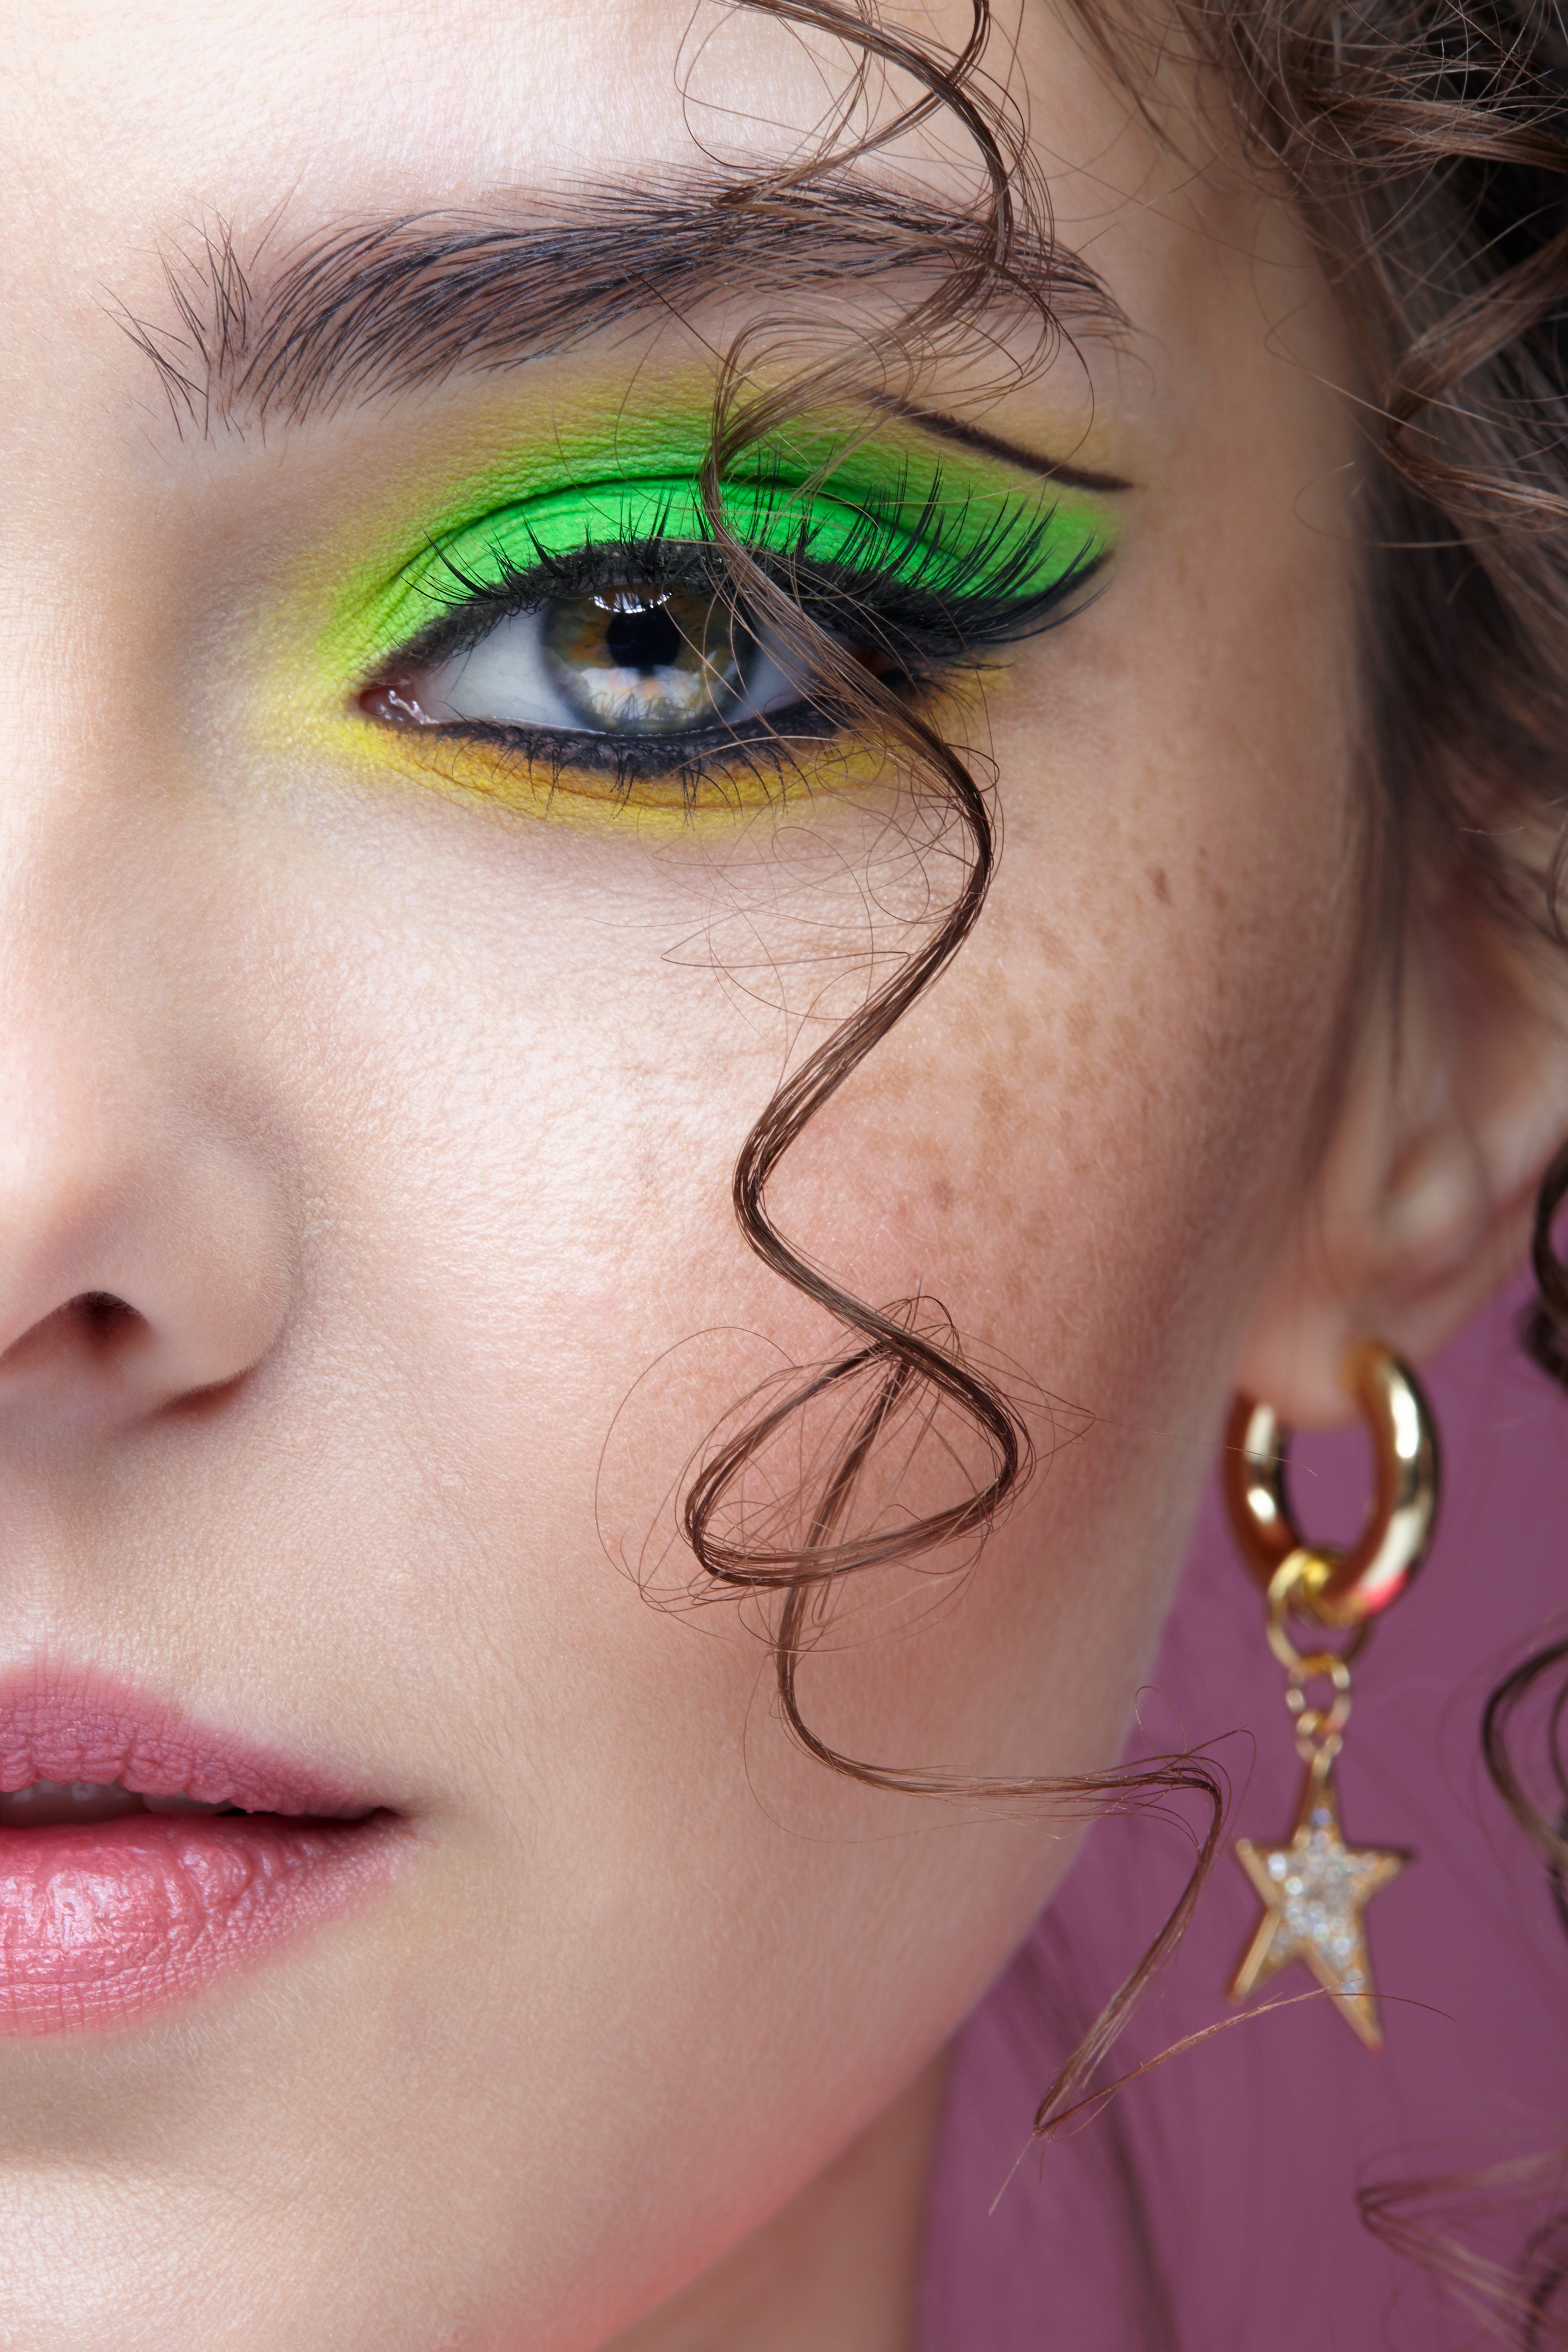 A portrait of a young woman with unusual green eyes, makeup, curly hair, and earrings, against a pink background | Source: Shutterstock